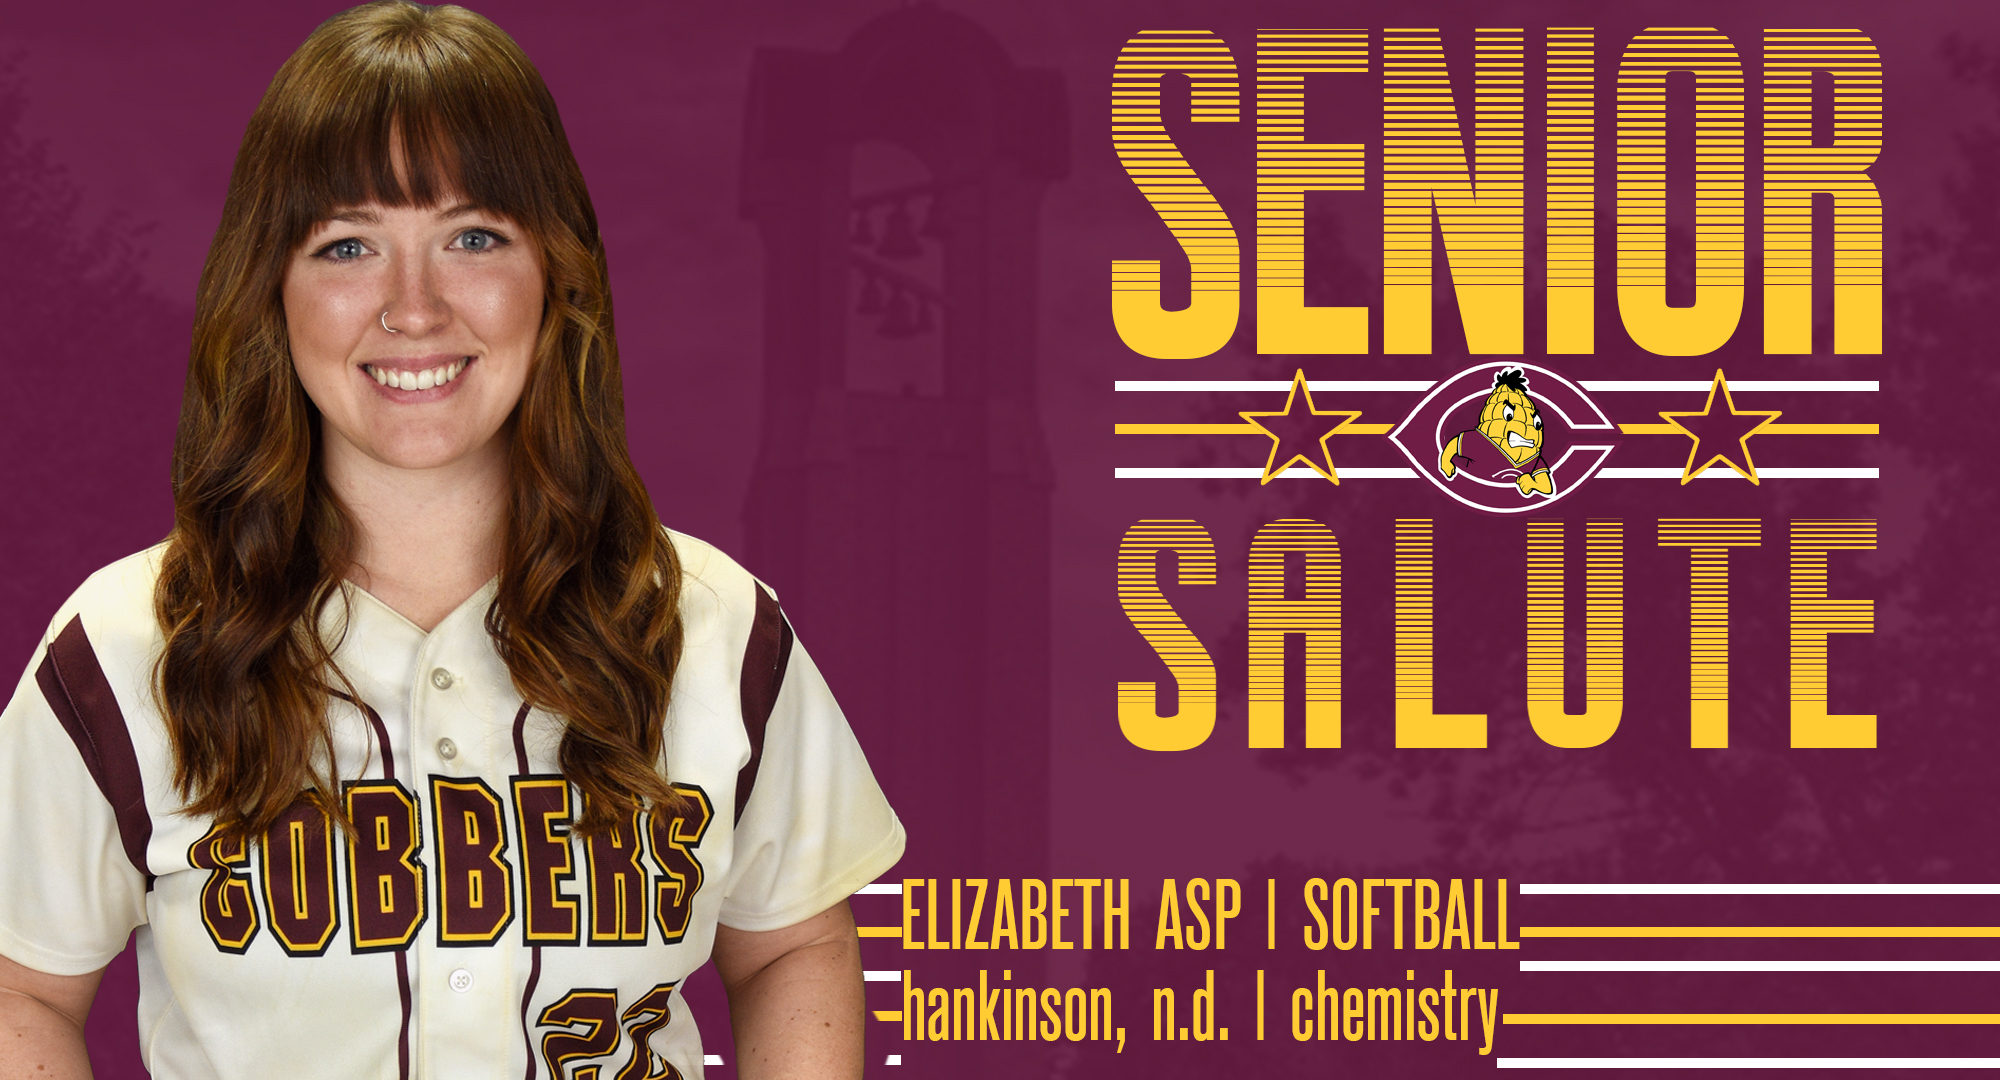 Senior Elizabeth Asp has played in 77 games for Cobber softball and has a .324 career batting average.